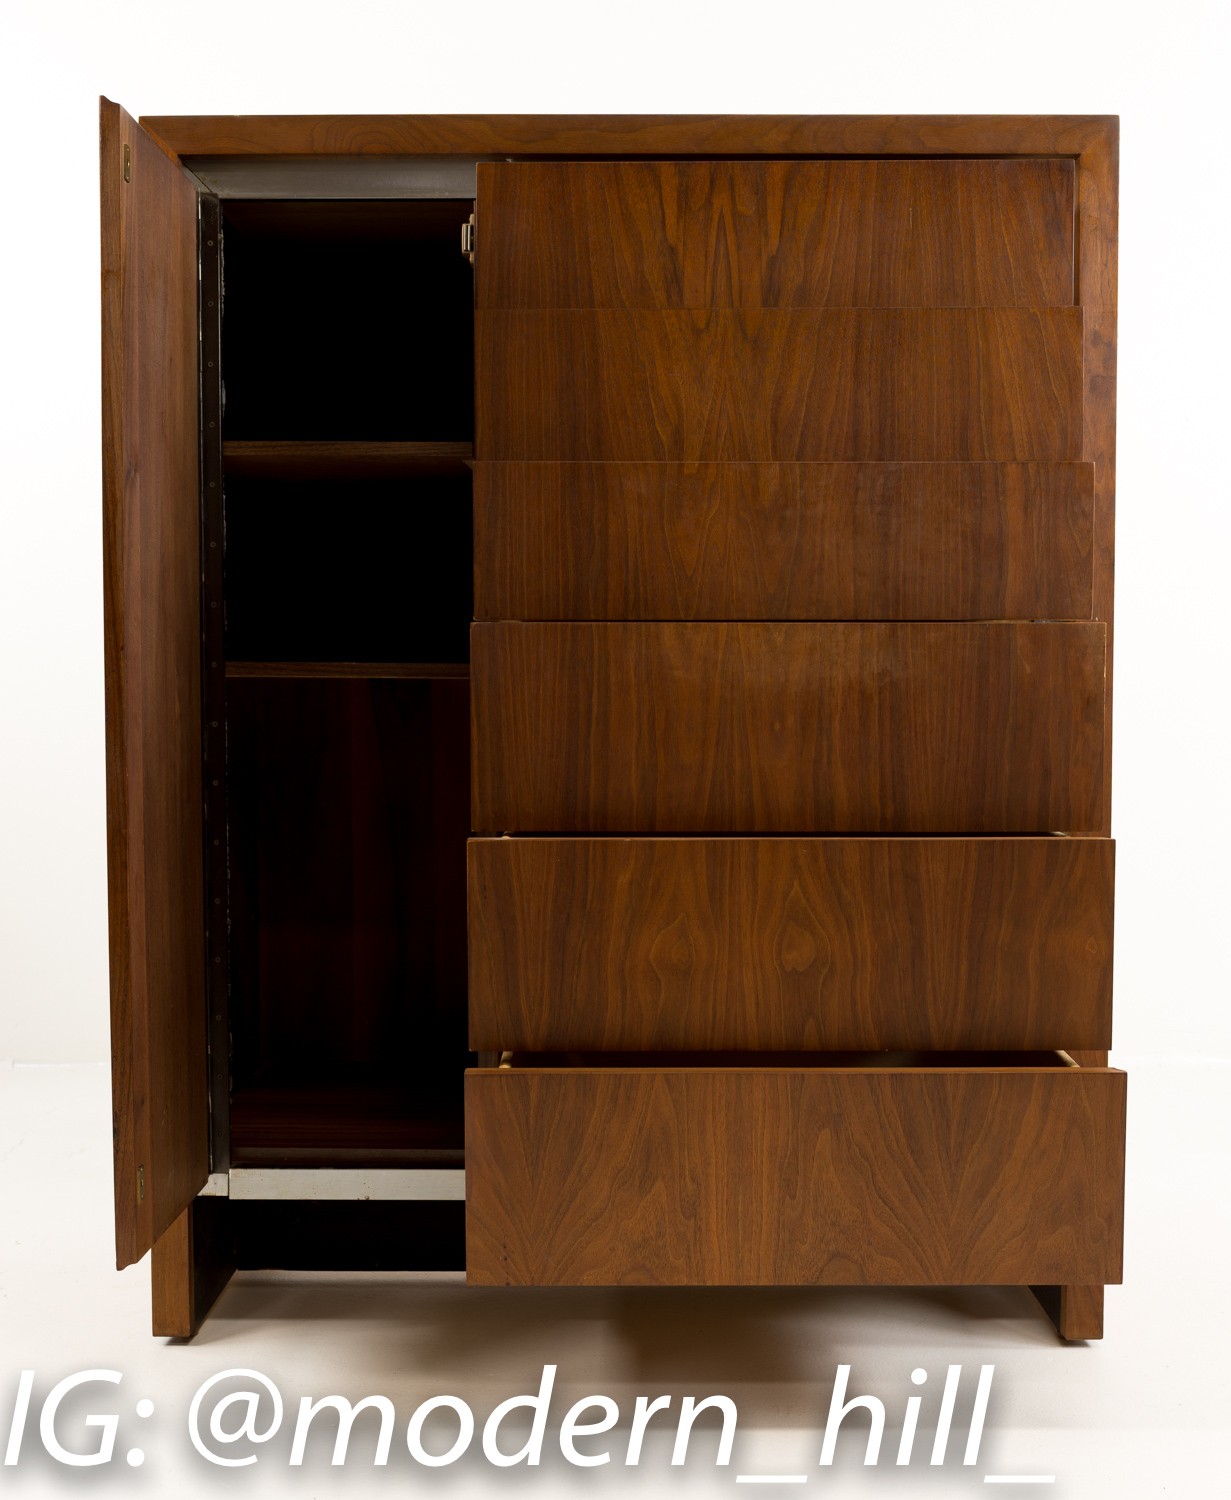 Milo Baughman for Dillingham Armoire Chest of Drawers Highboy